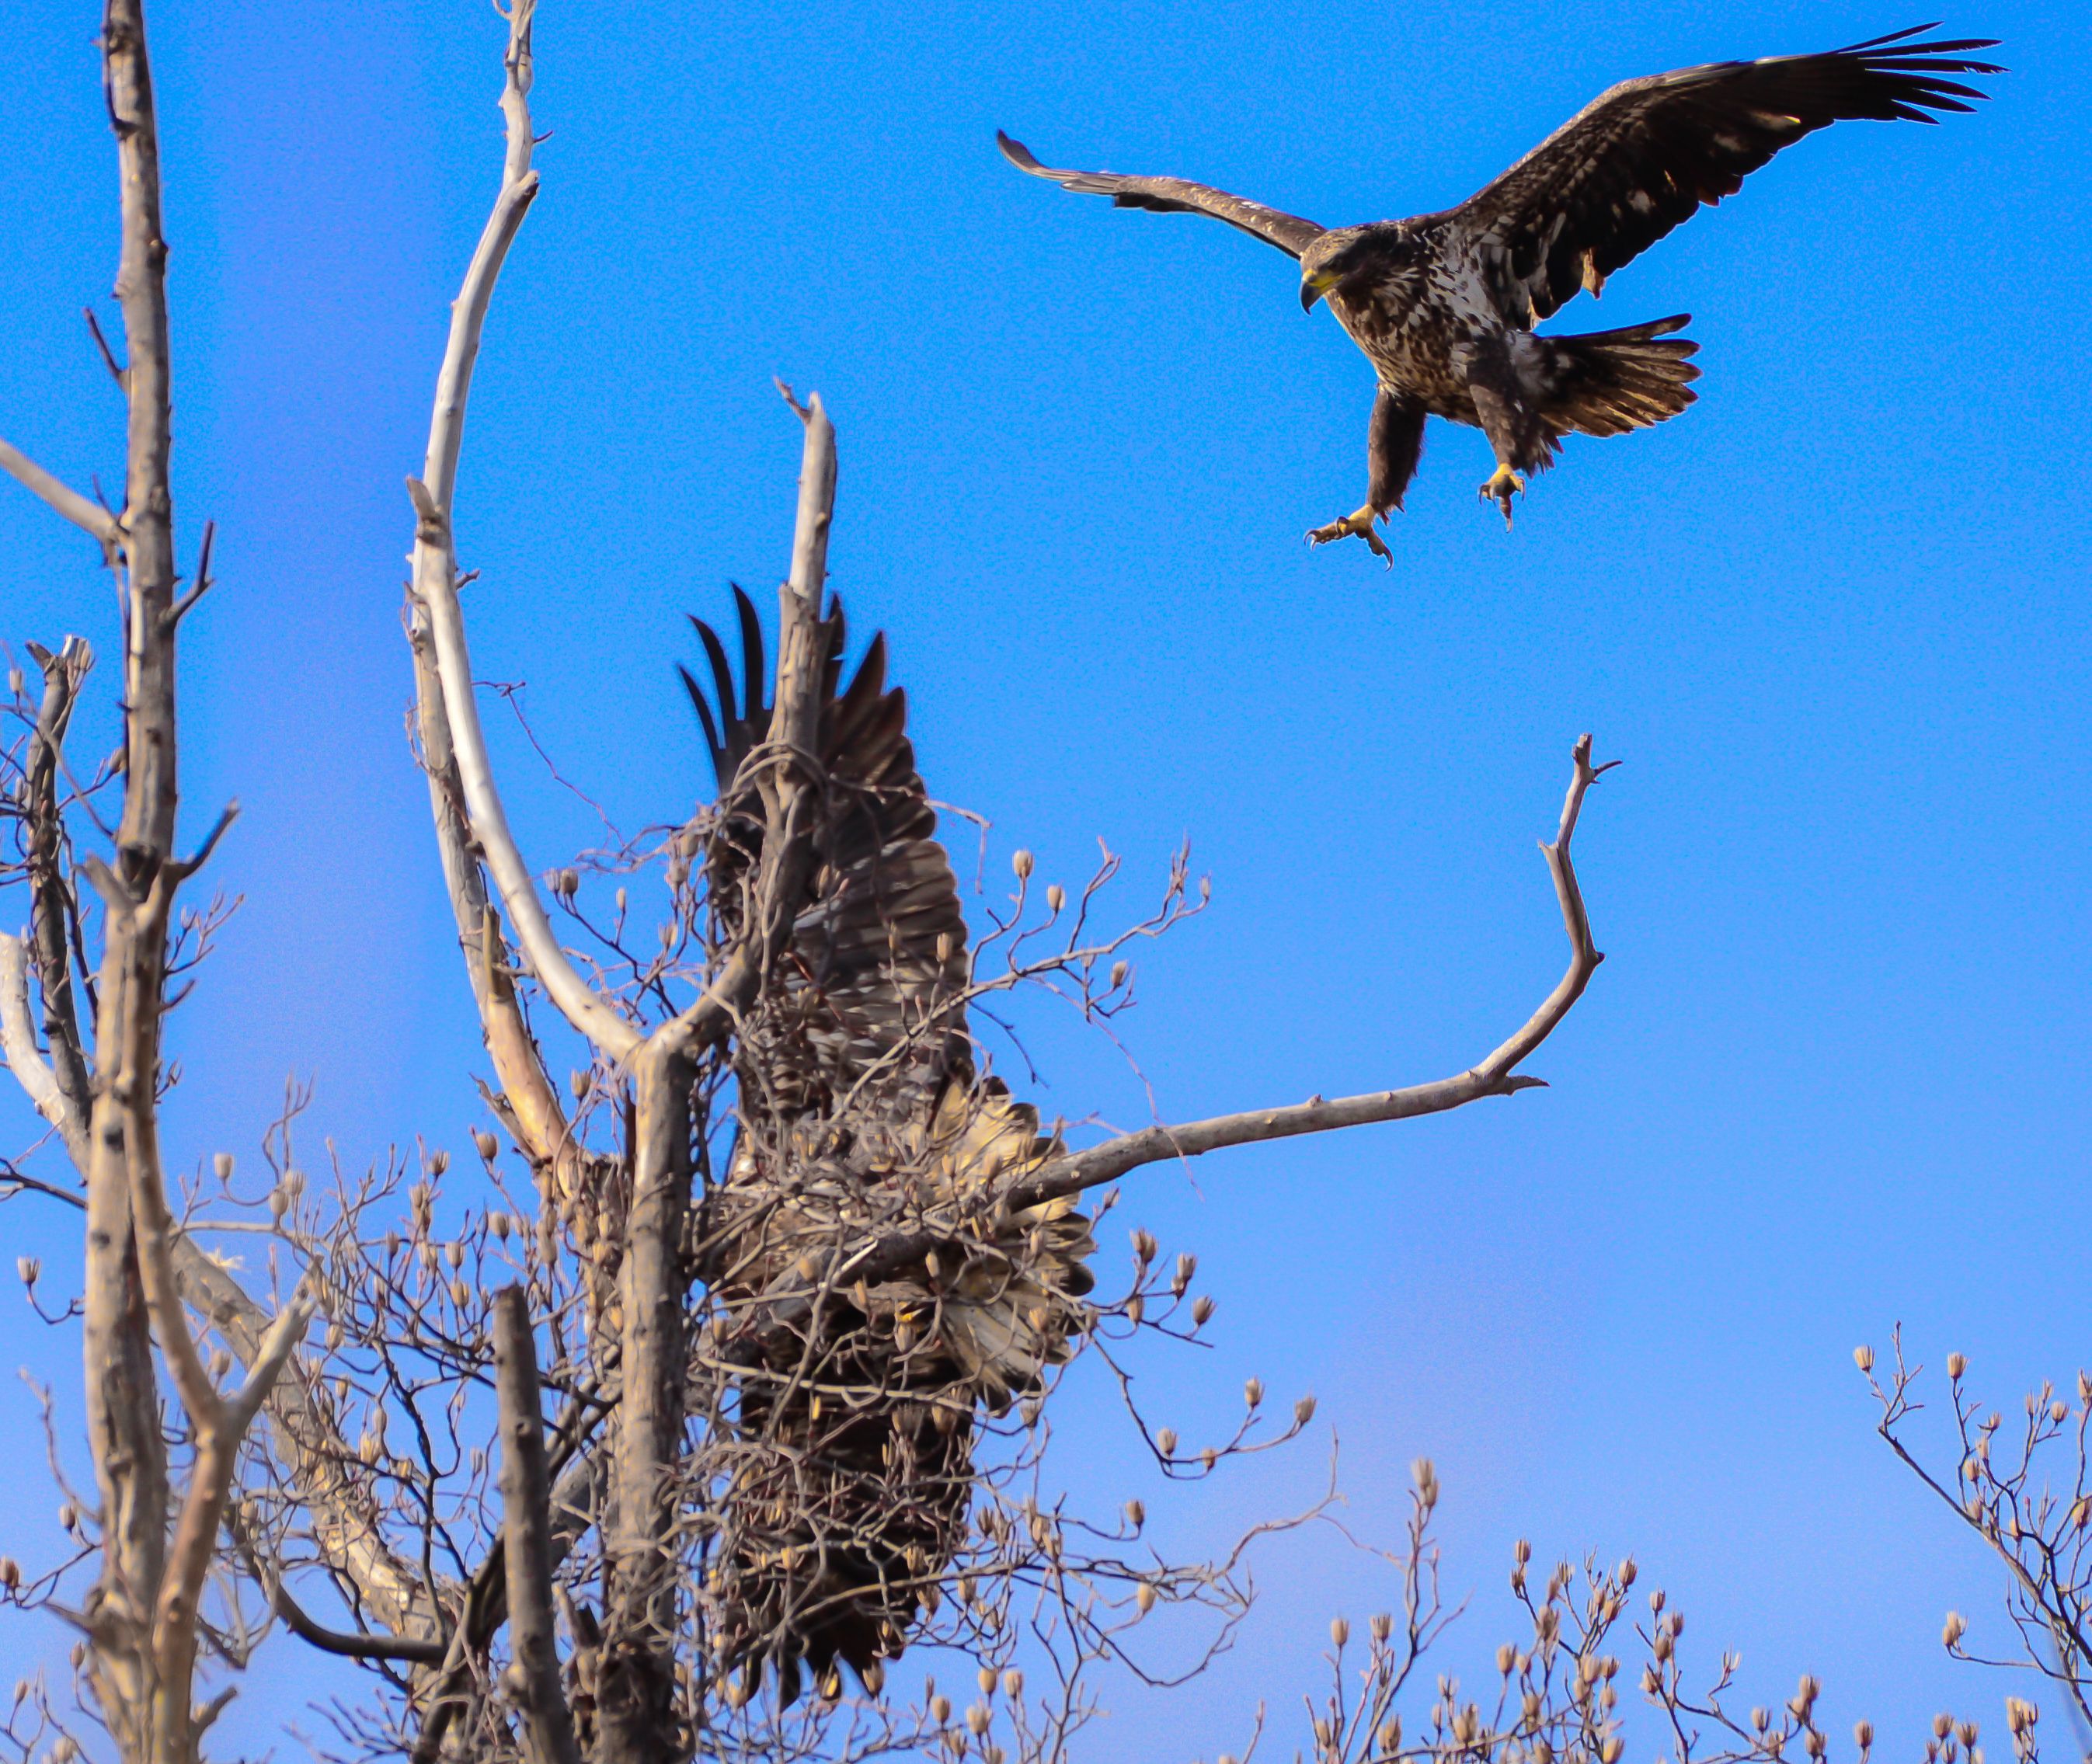 A juvenile bald eagle landing and one taking off from a tree branch ...